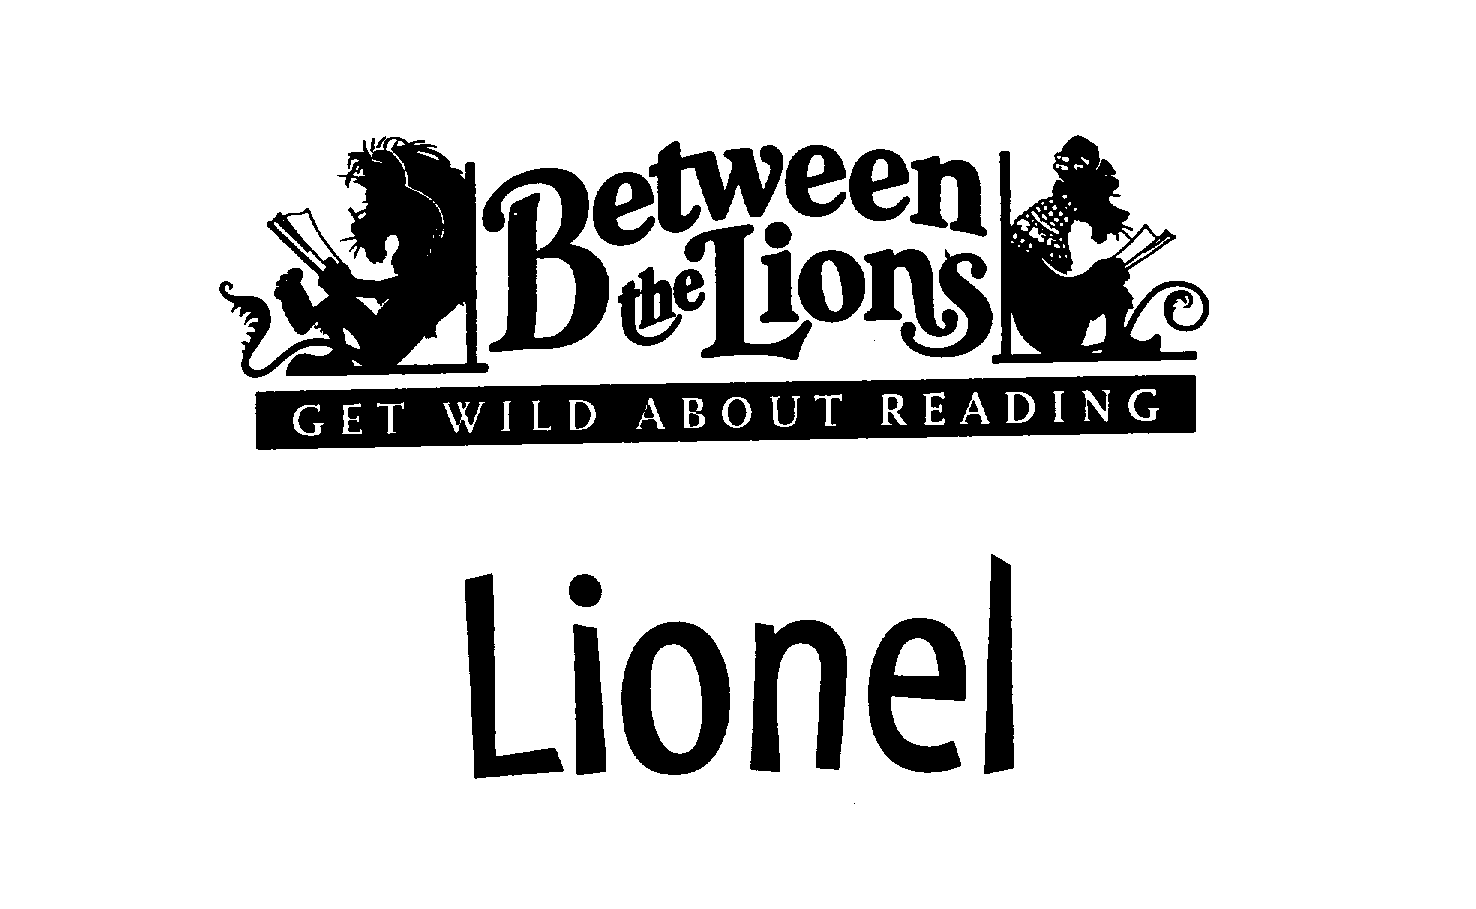  BETWEEN THE LIONS GET WILD ABOUT READING LIONEL AND DESIGN